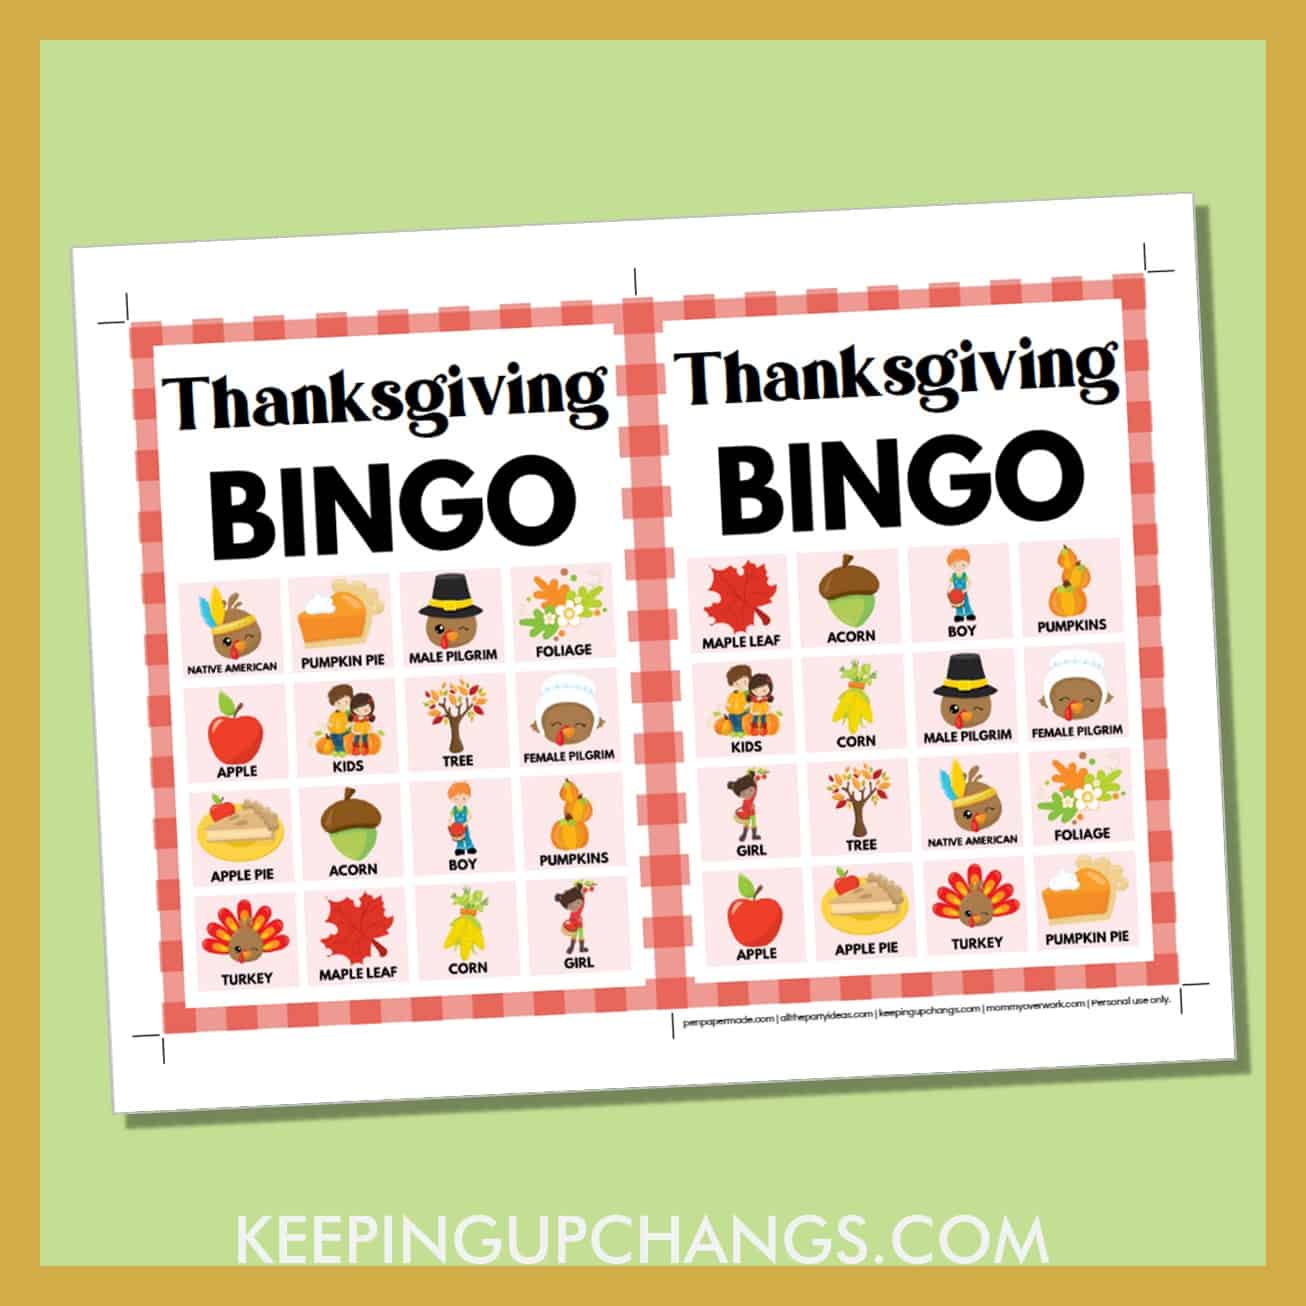 free fall thanksgiving bingo card 4x4 5x7 game boards with images and text words.